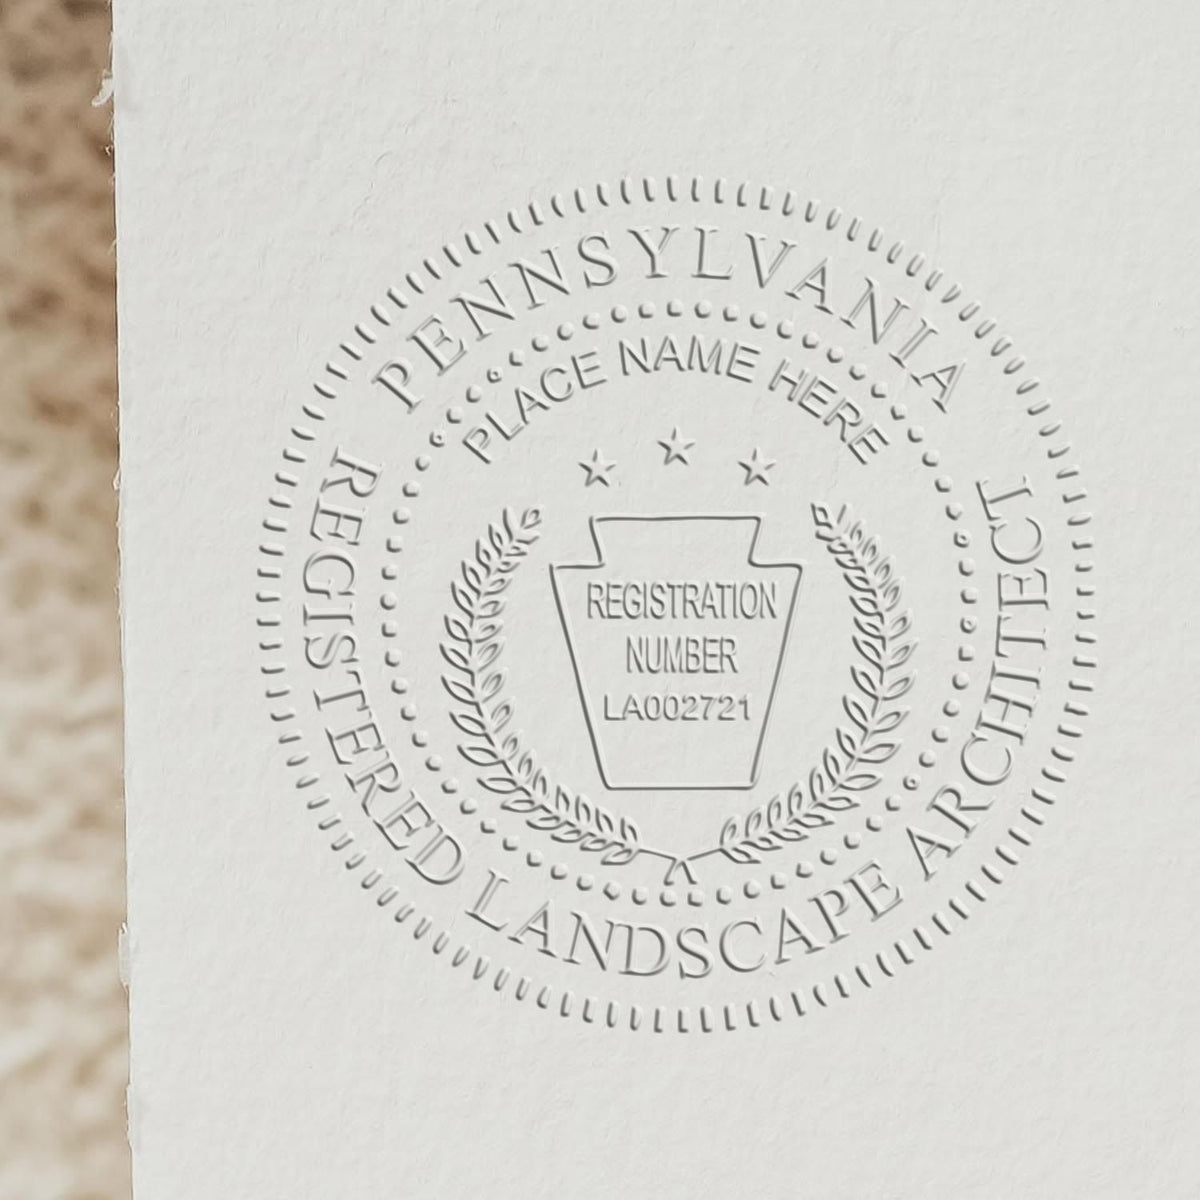 A photograph of the Hybrid Pennsylvania Landscape Architect Seal stamp impression reveals a vivid, professional image of the on paper.